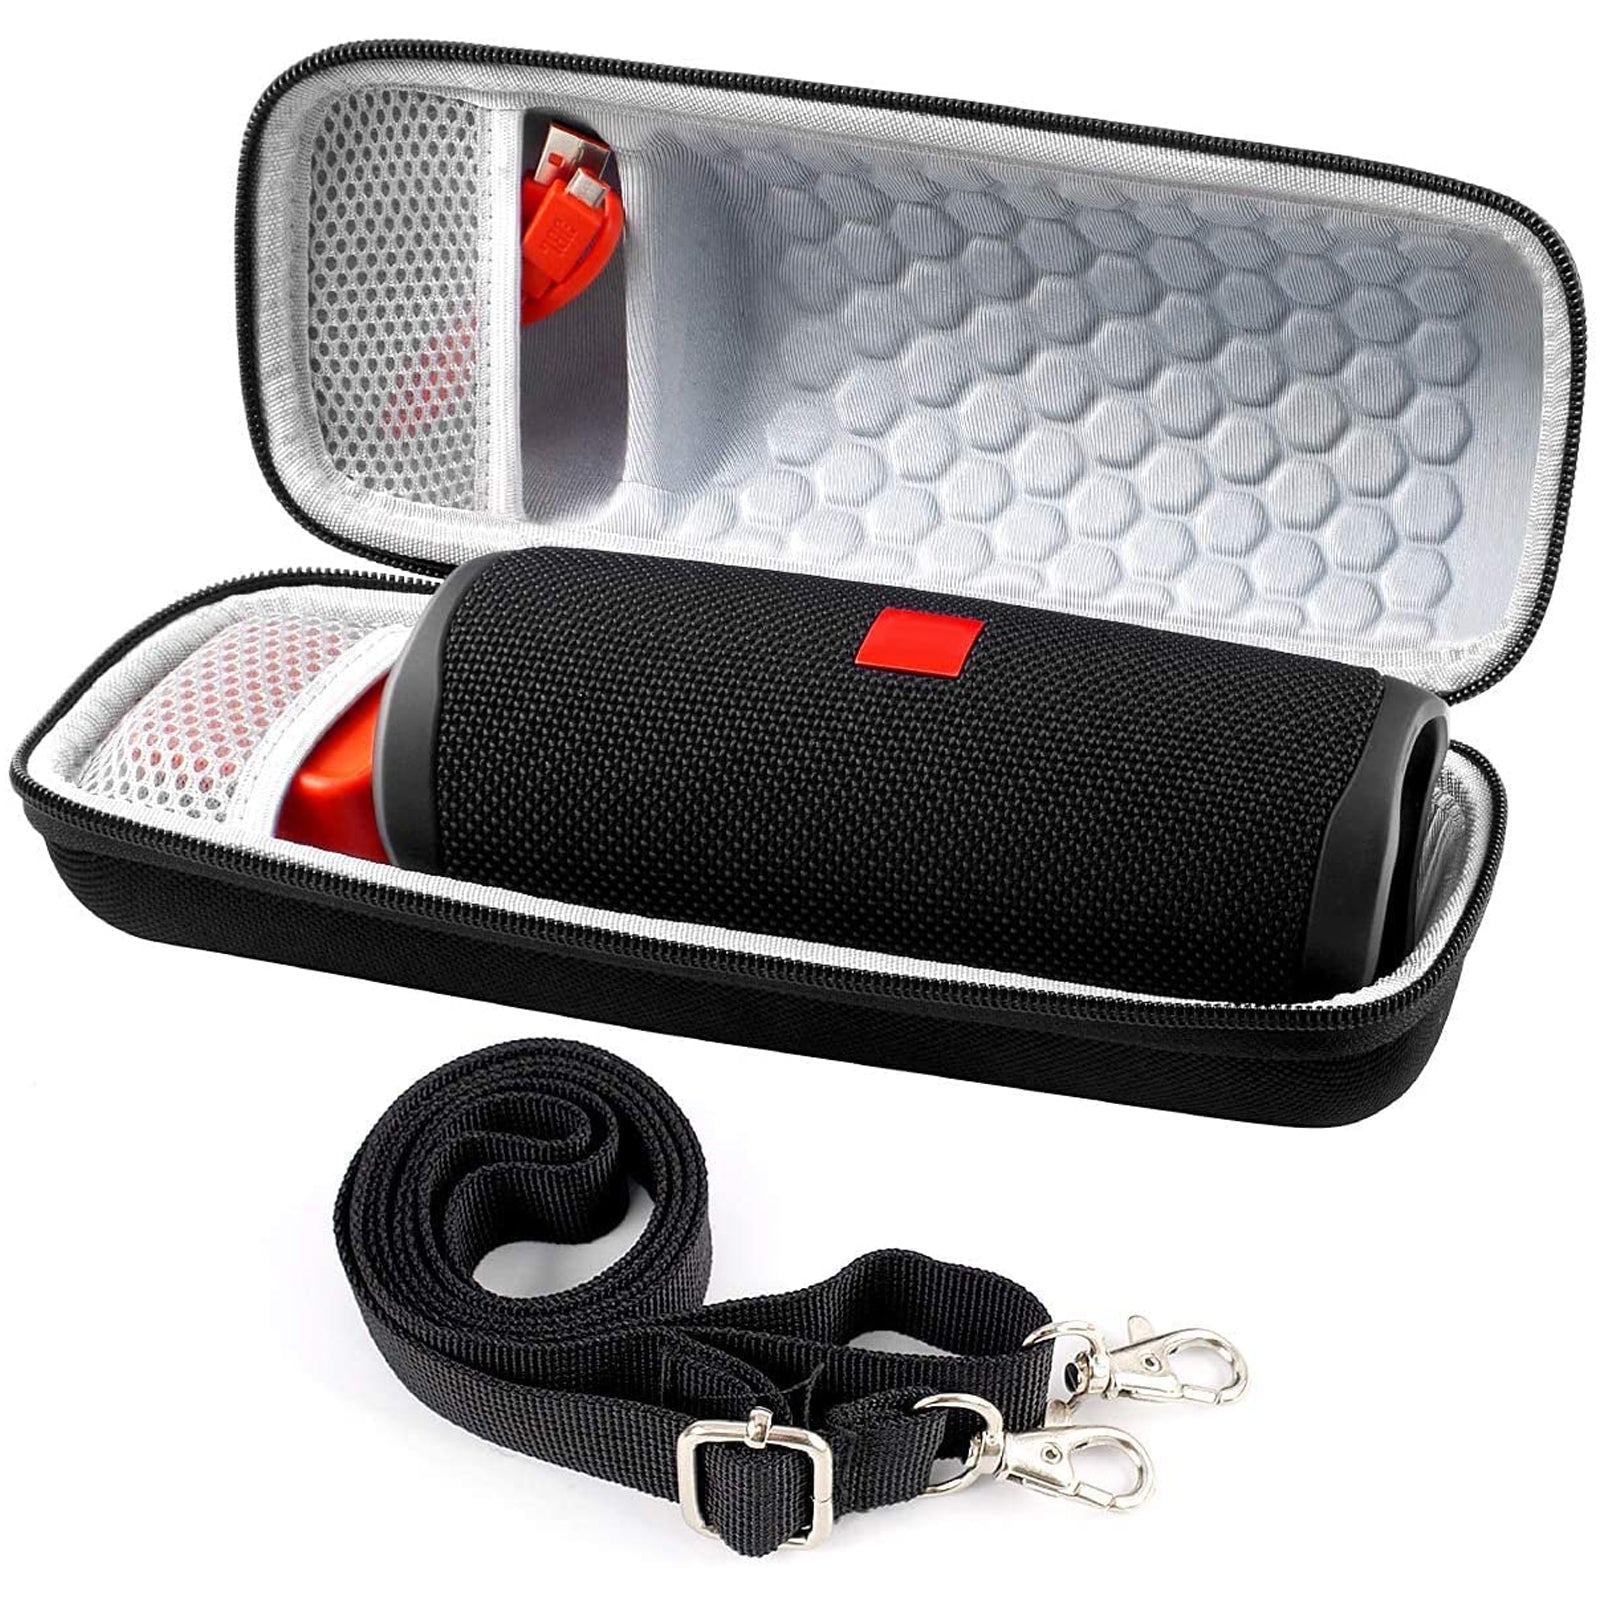  Silicone Case for JBL FLIP 6 Waterproof Portable